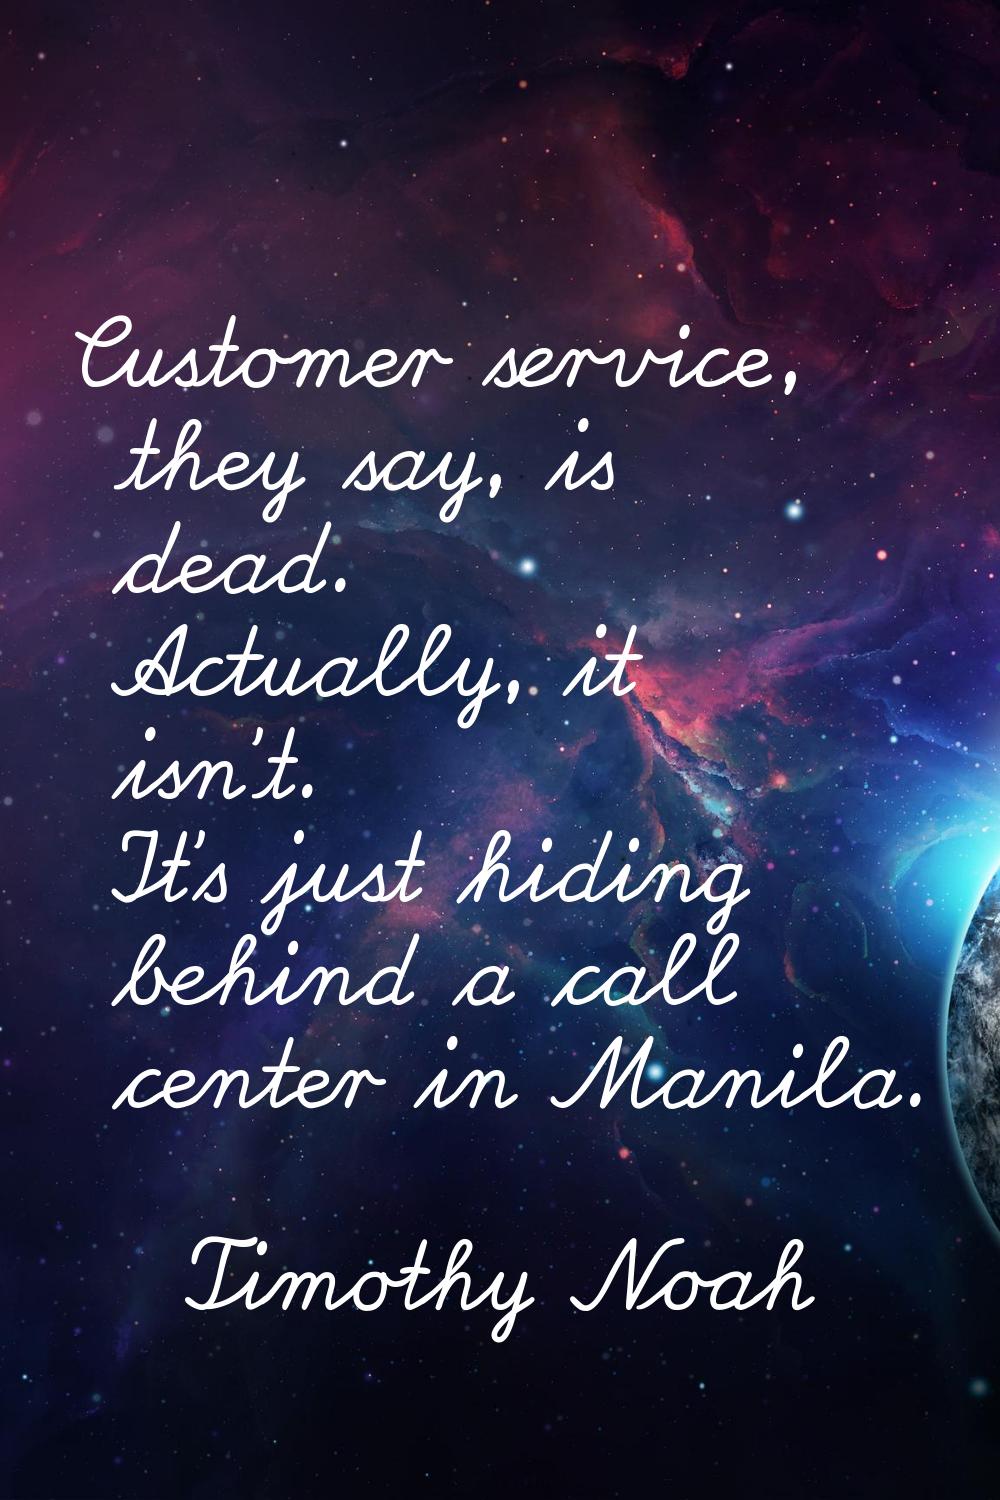 Customer service, they say, is dead. Actually, it isn't. It's just hiding behind a call center in M